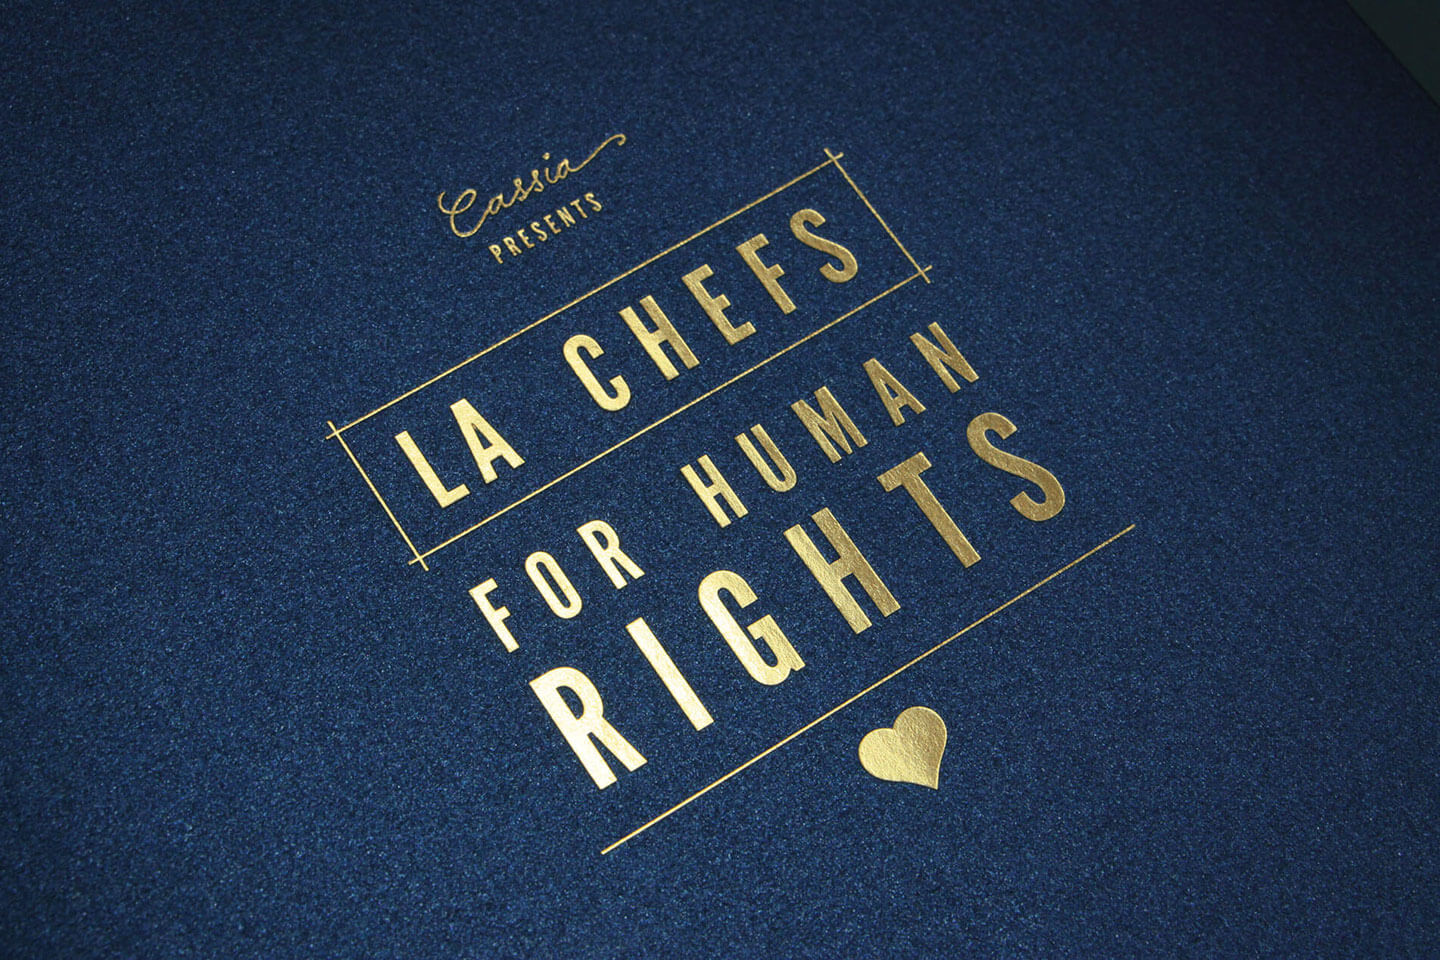 LA Chefs for Human Rights